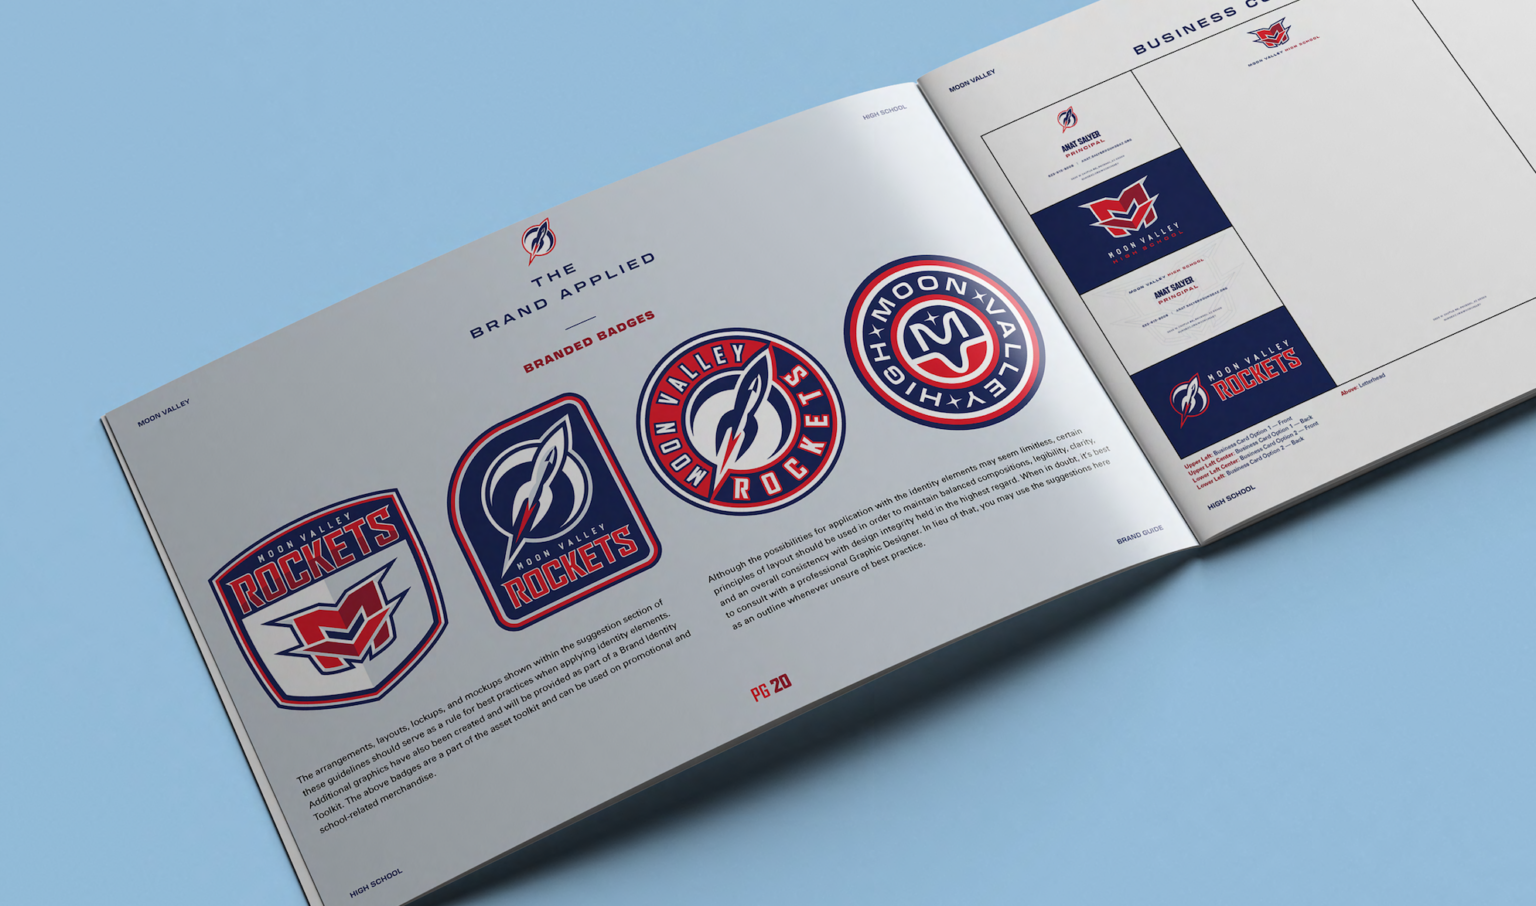 Brand book for the Moon Valley Rockets, in Arizona. Two page spread of logo treatments and color palettes